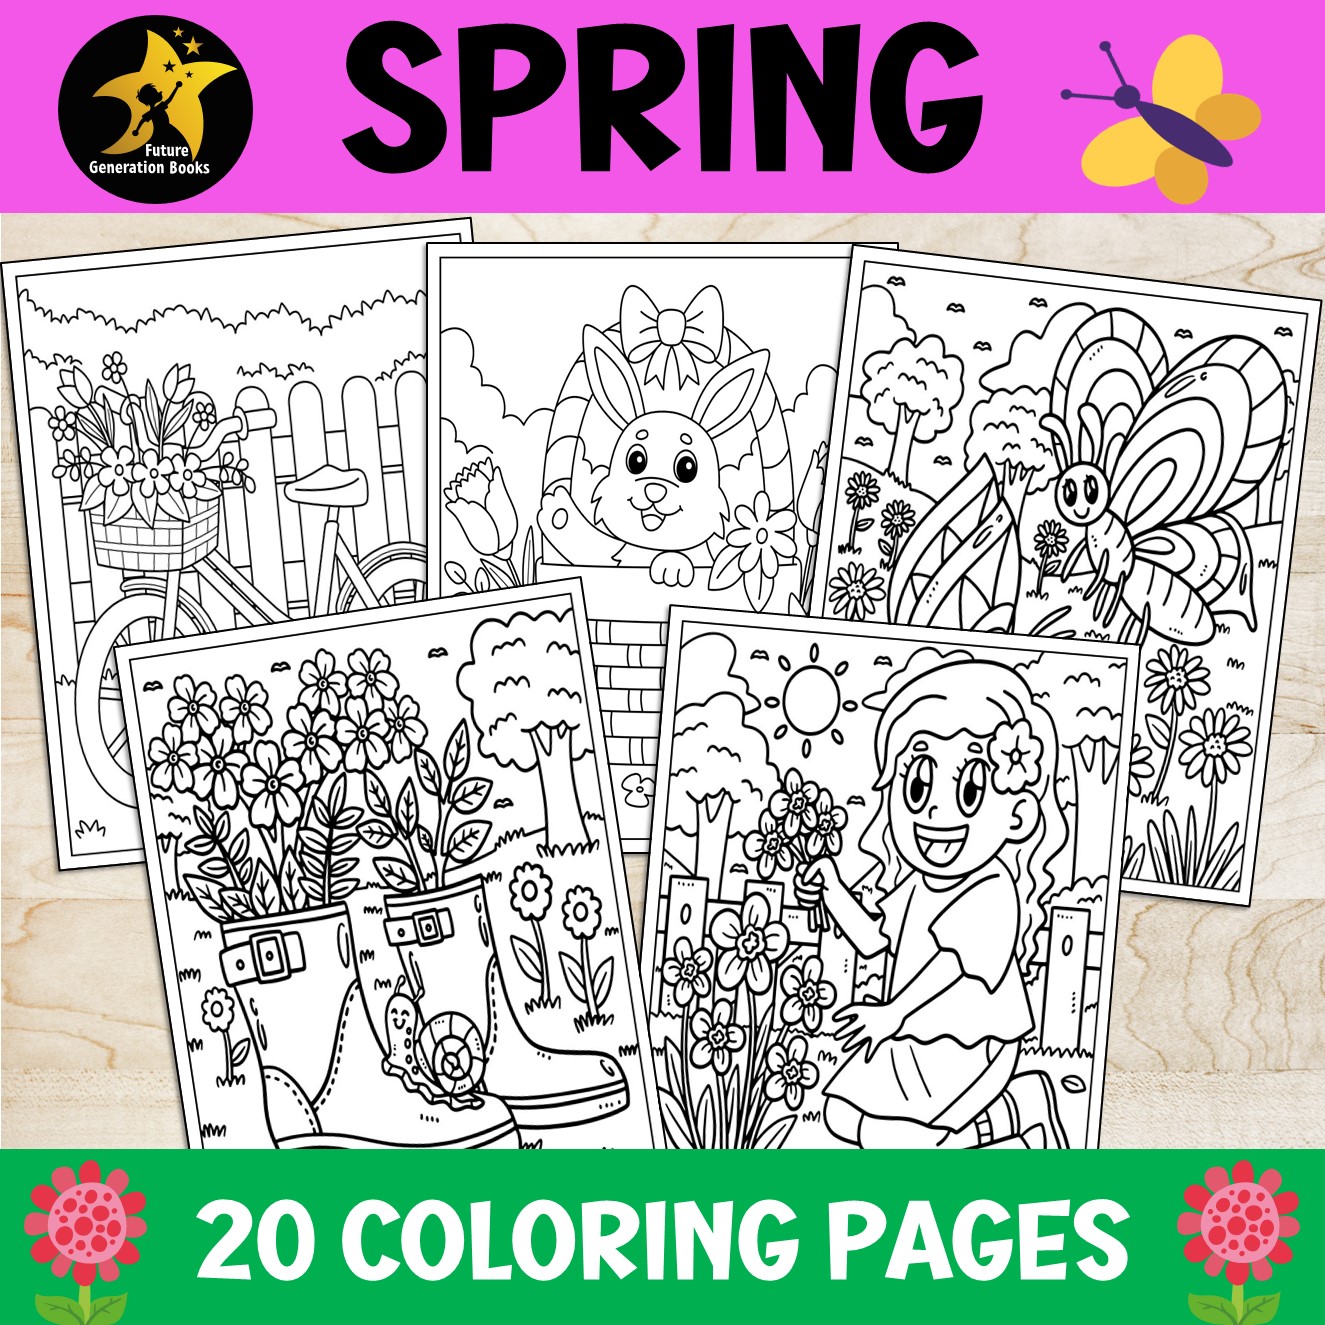 Spring after break activities coloring pages march april activities spring coloring pages preschool made by teachers